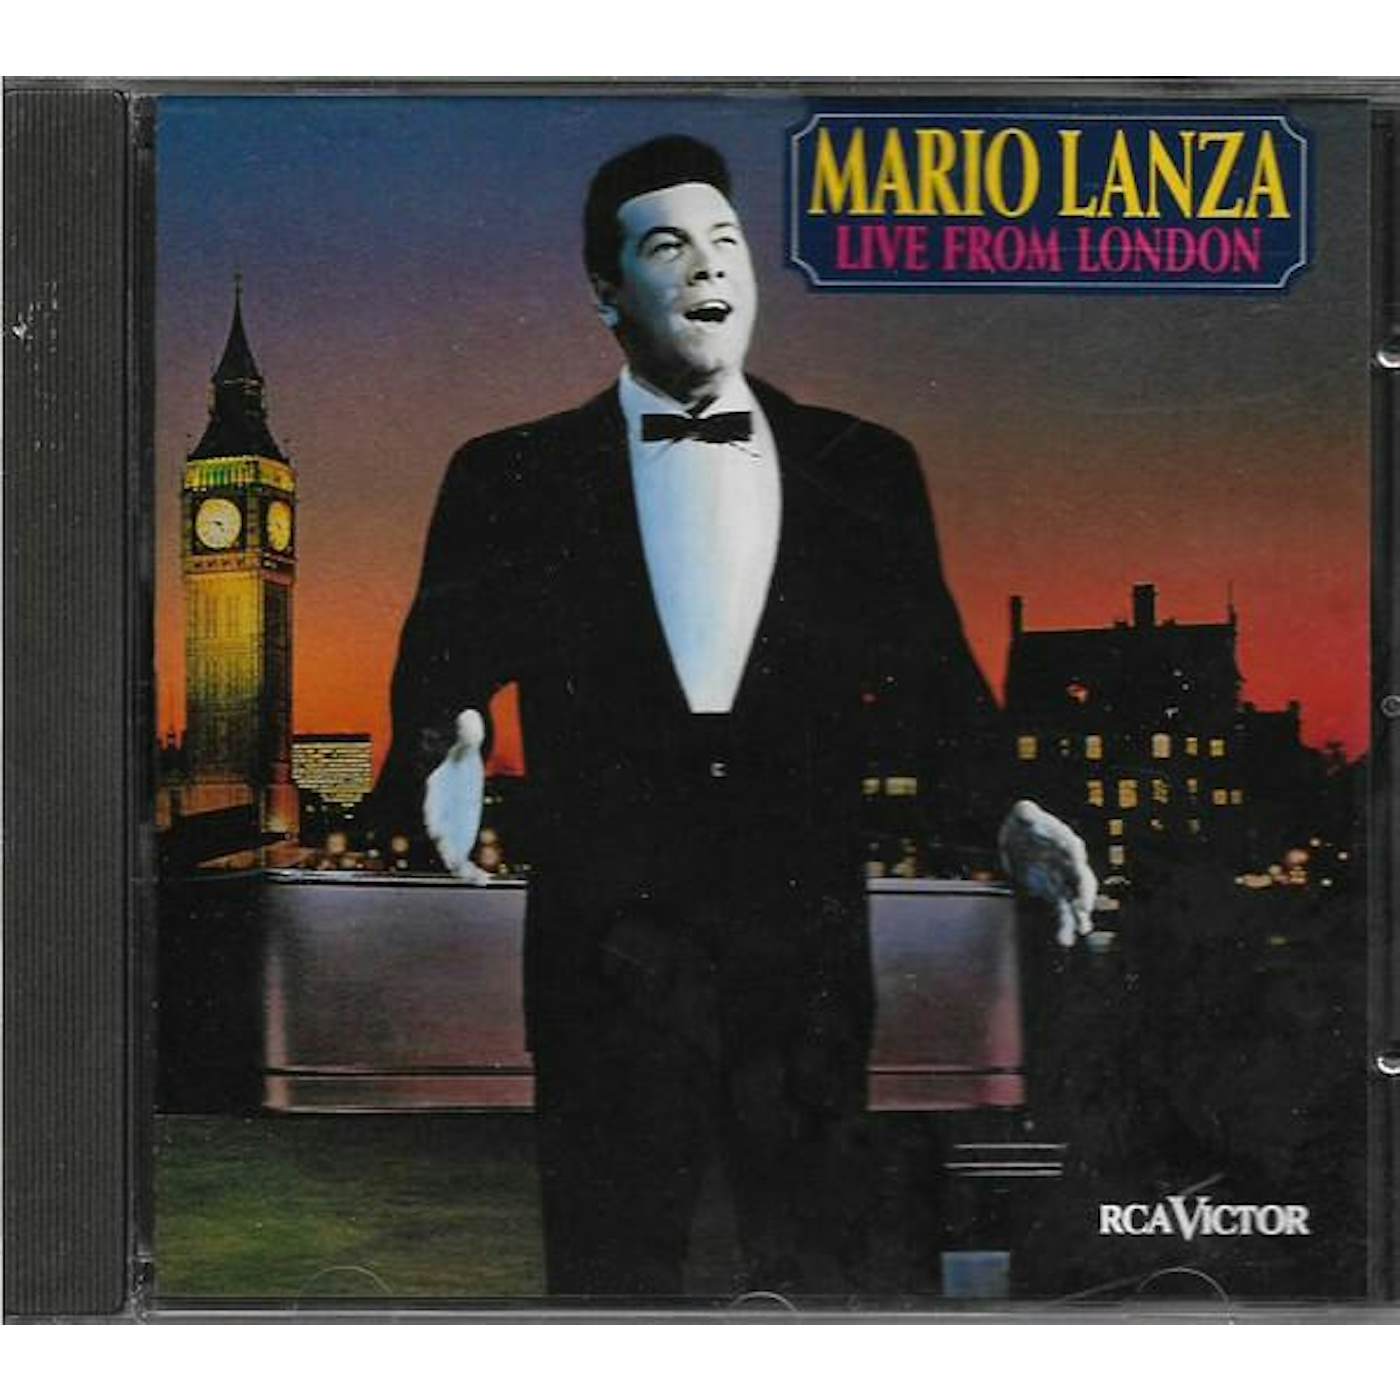 Mario Lanza LIVE FROM LONDON CD